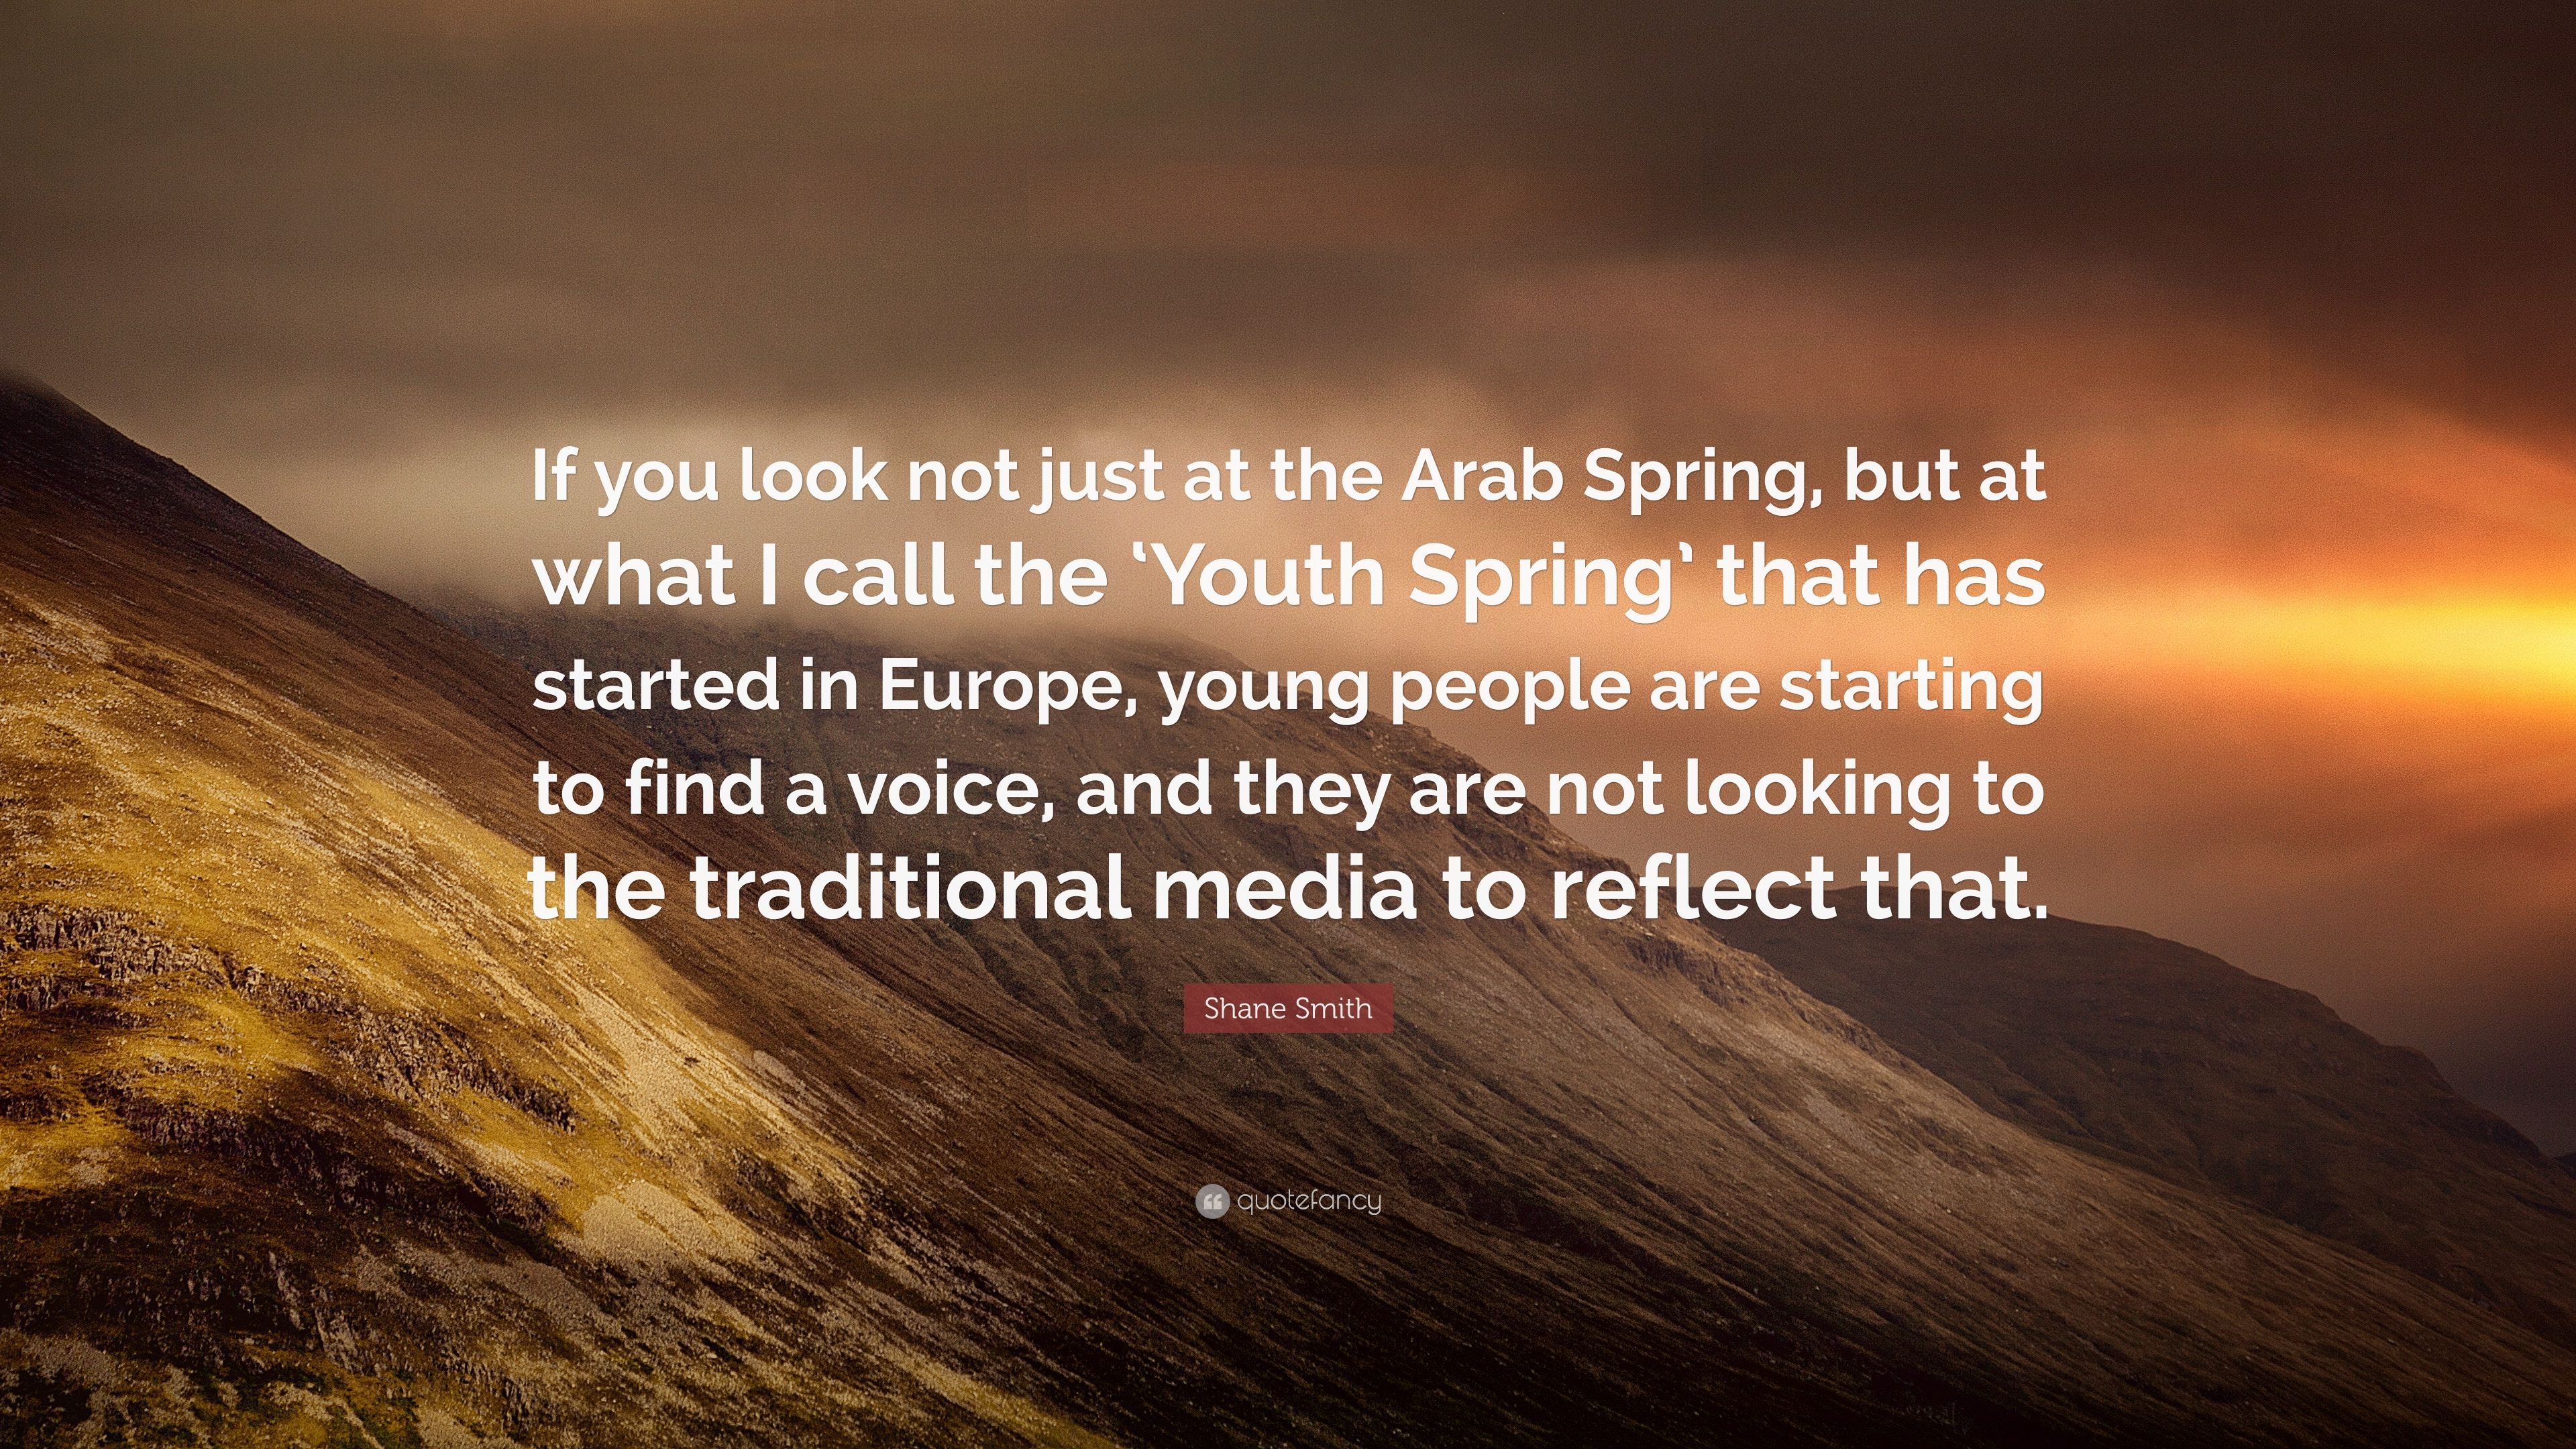 Shane Smith Quote: “If you look not just at the Arab Spring, but